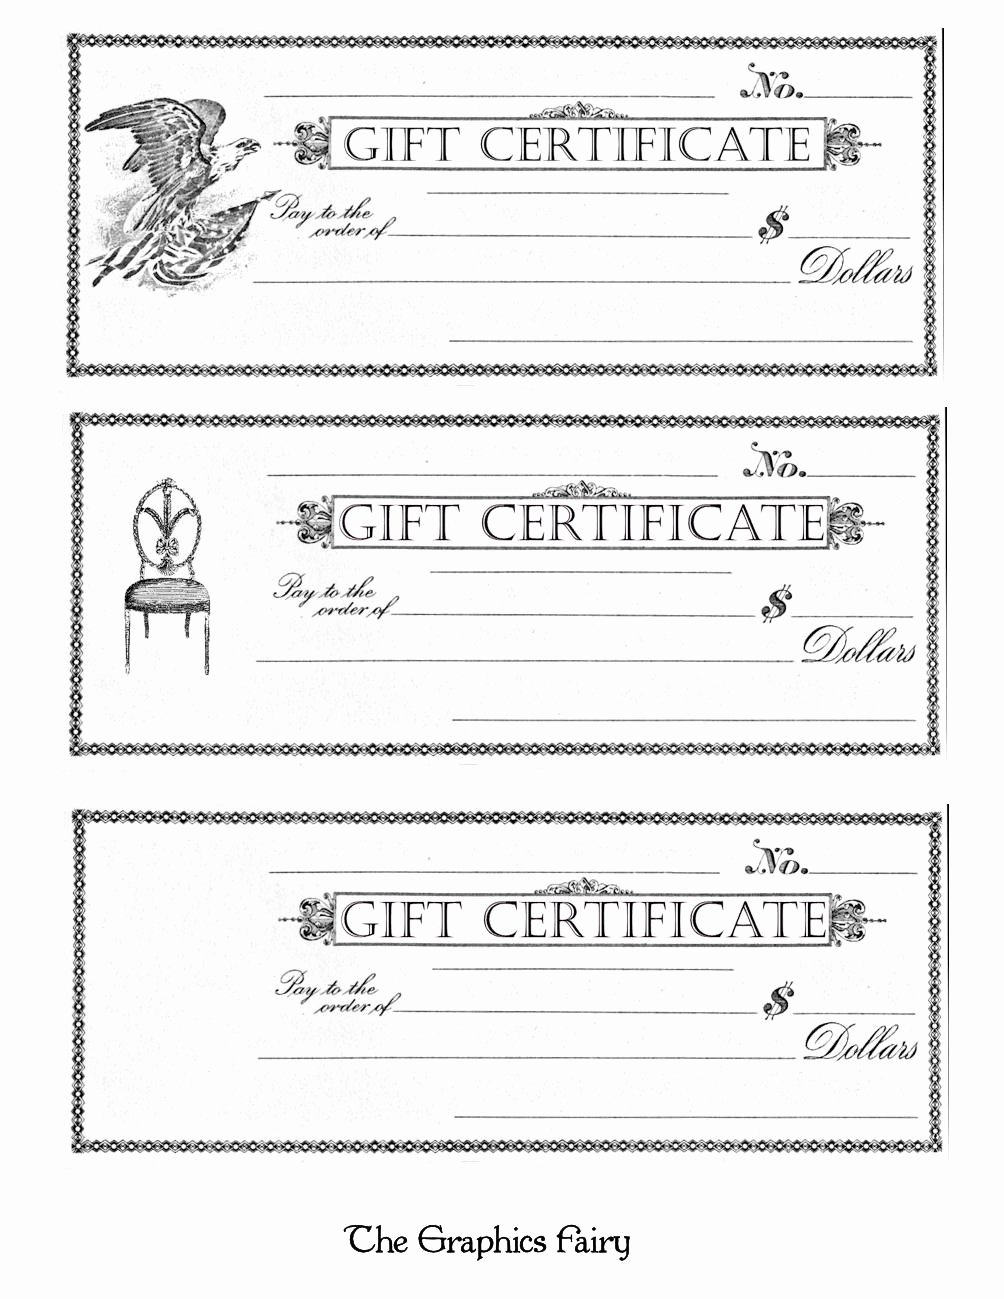 Free Printable Gift Certificates the Graphics Fairy